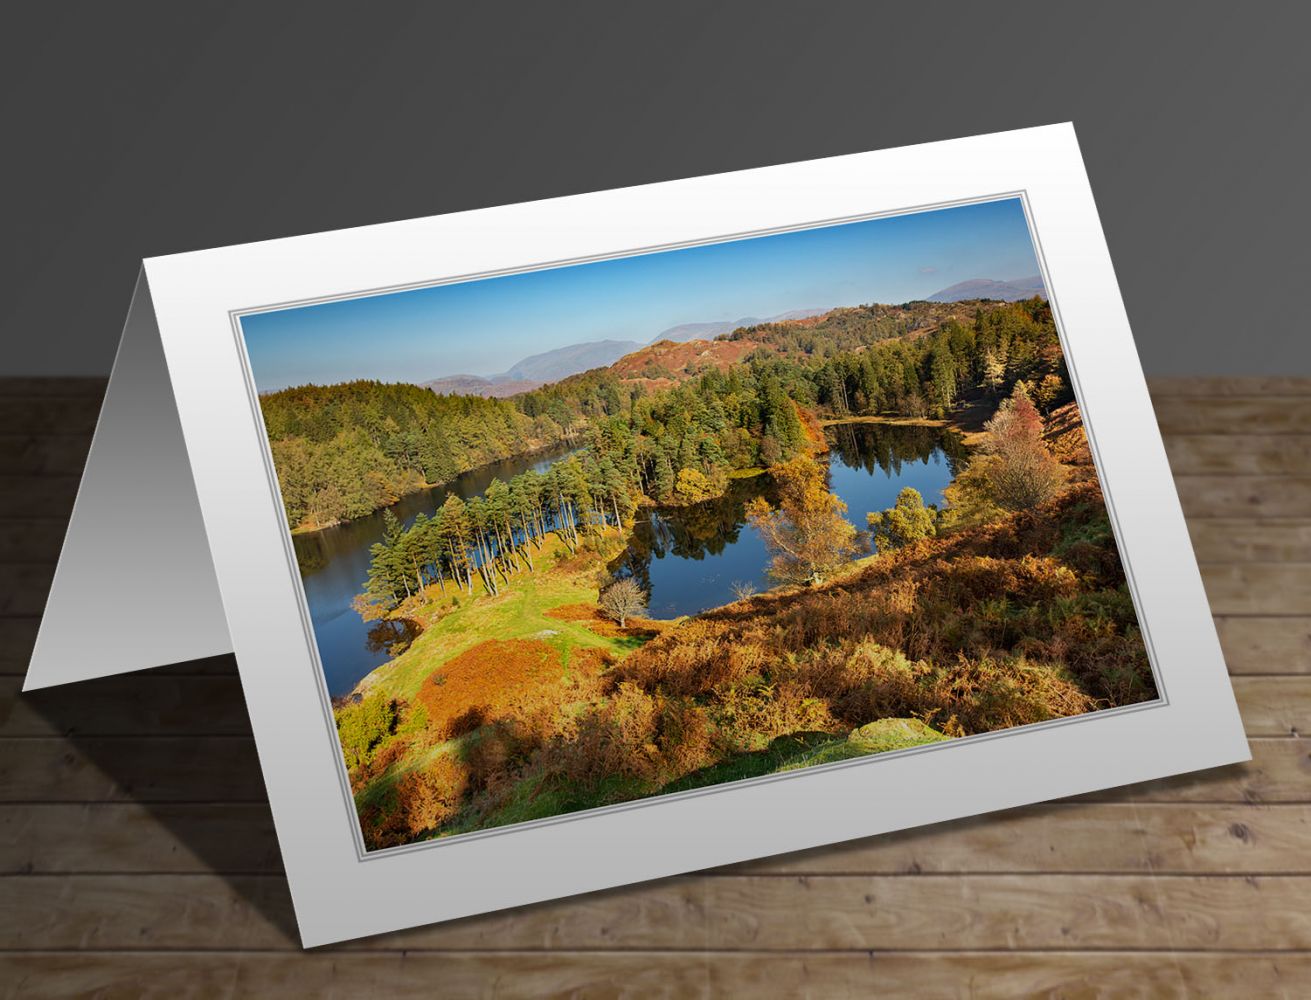 A greetings card containing the image Tarn Hows in autumn sunshine by Martin Lawrence